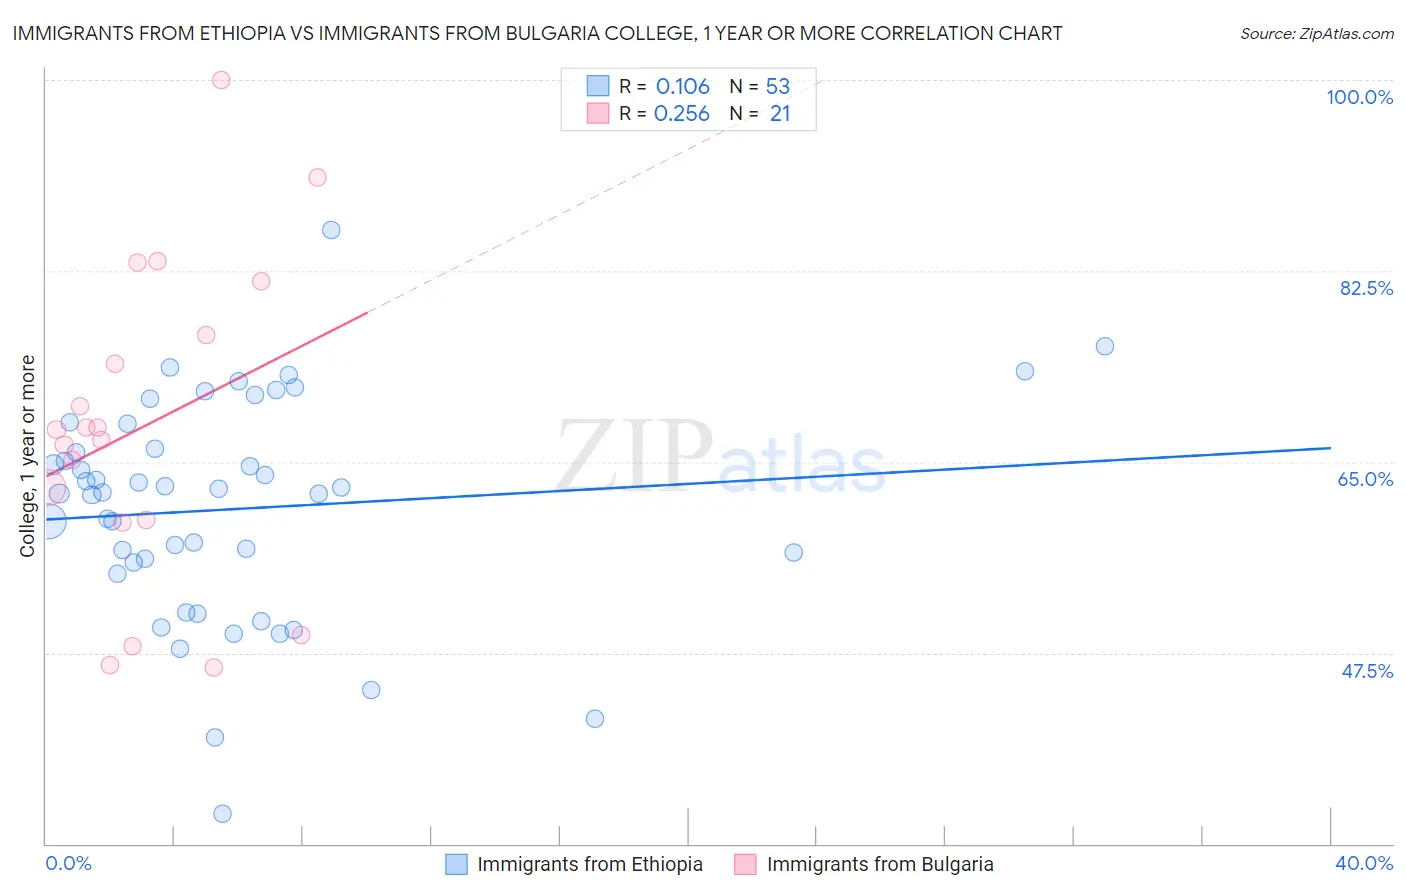 Immigrants from Ethiopia vs Immigrants from Bulgaria College, 1 year or more